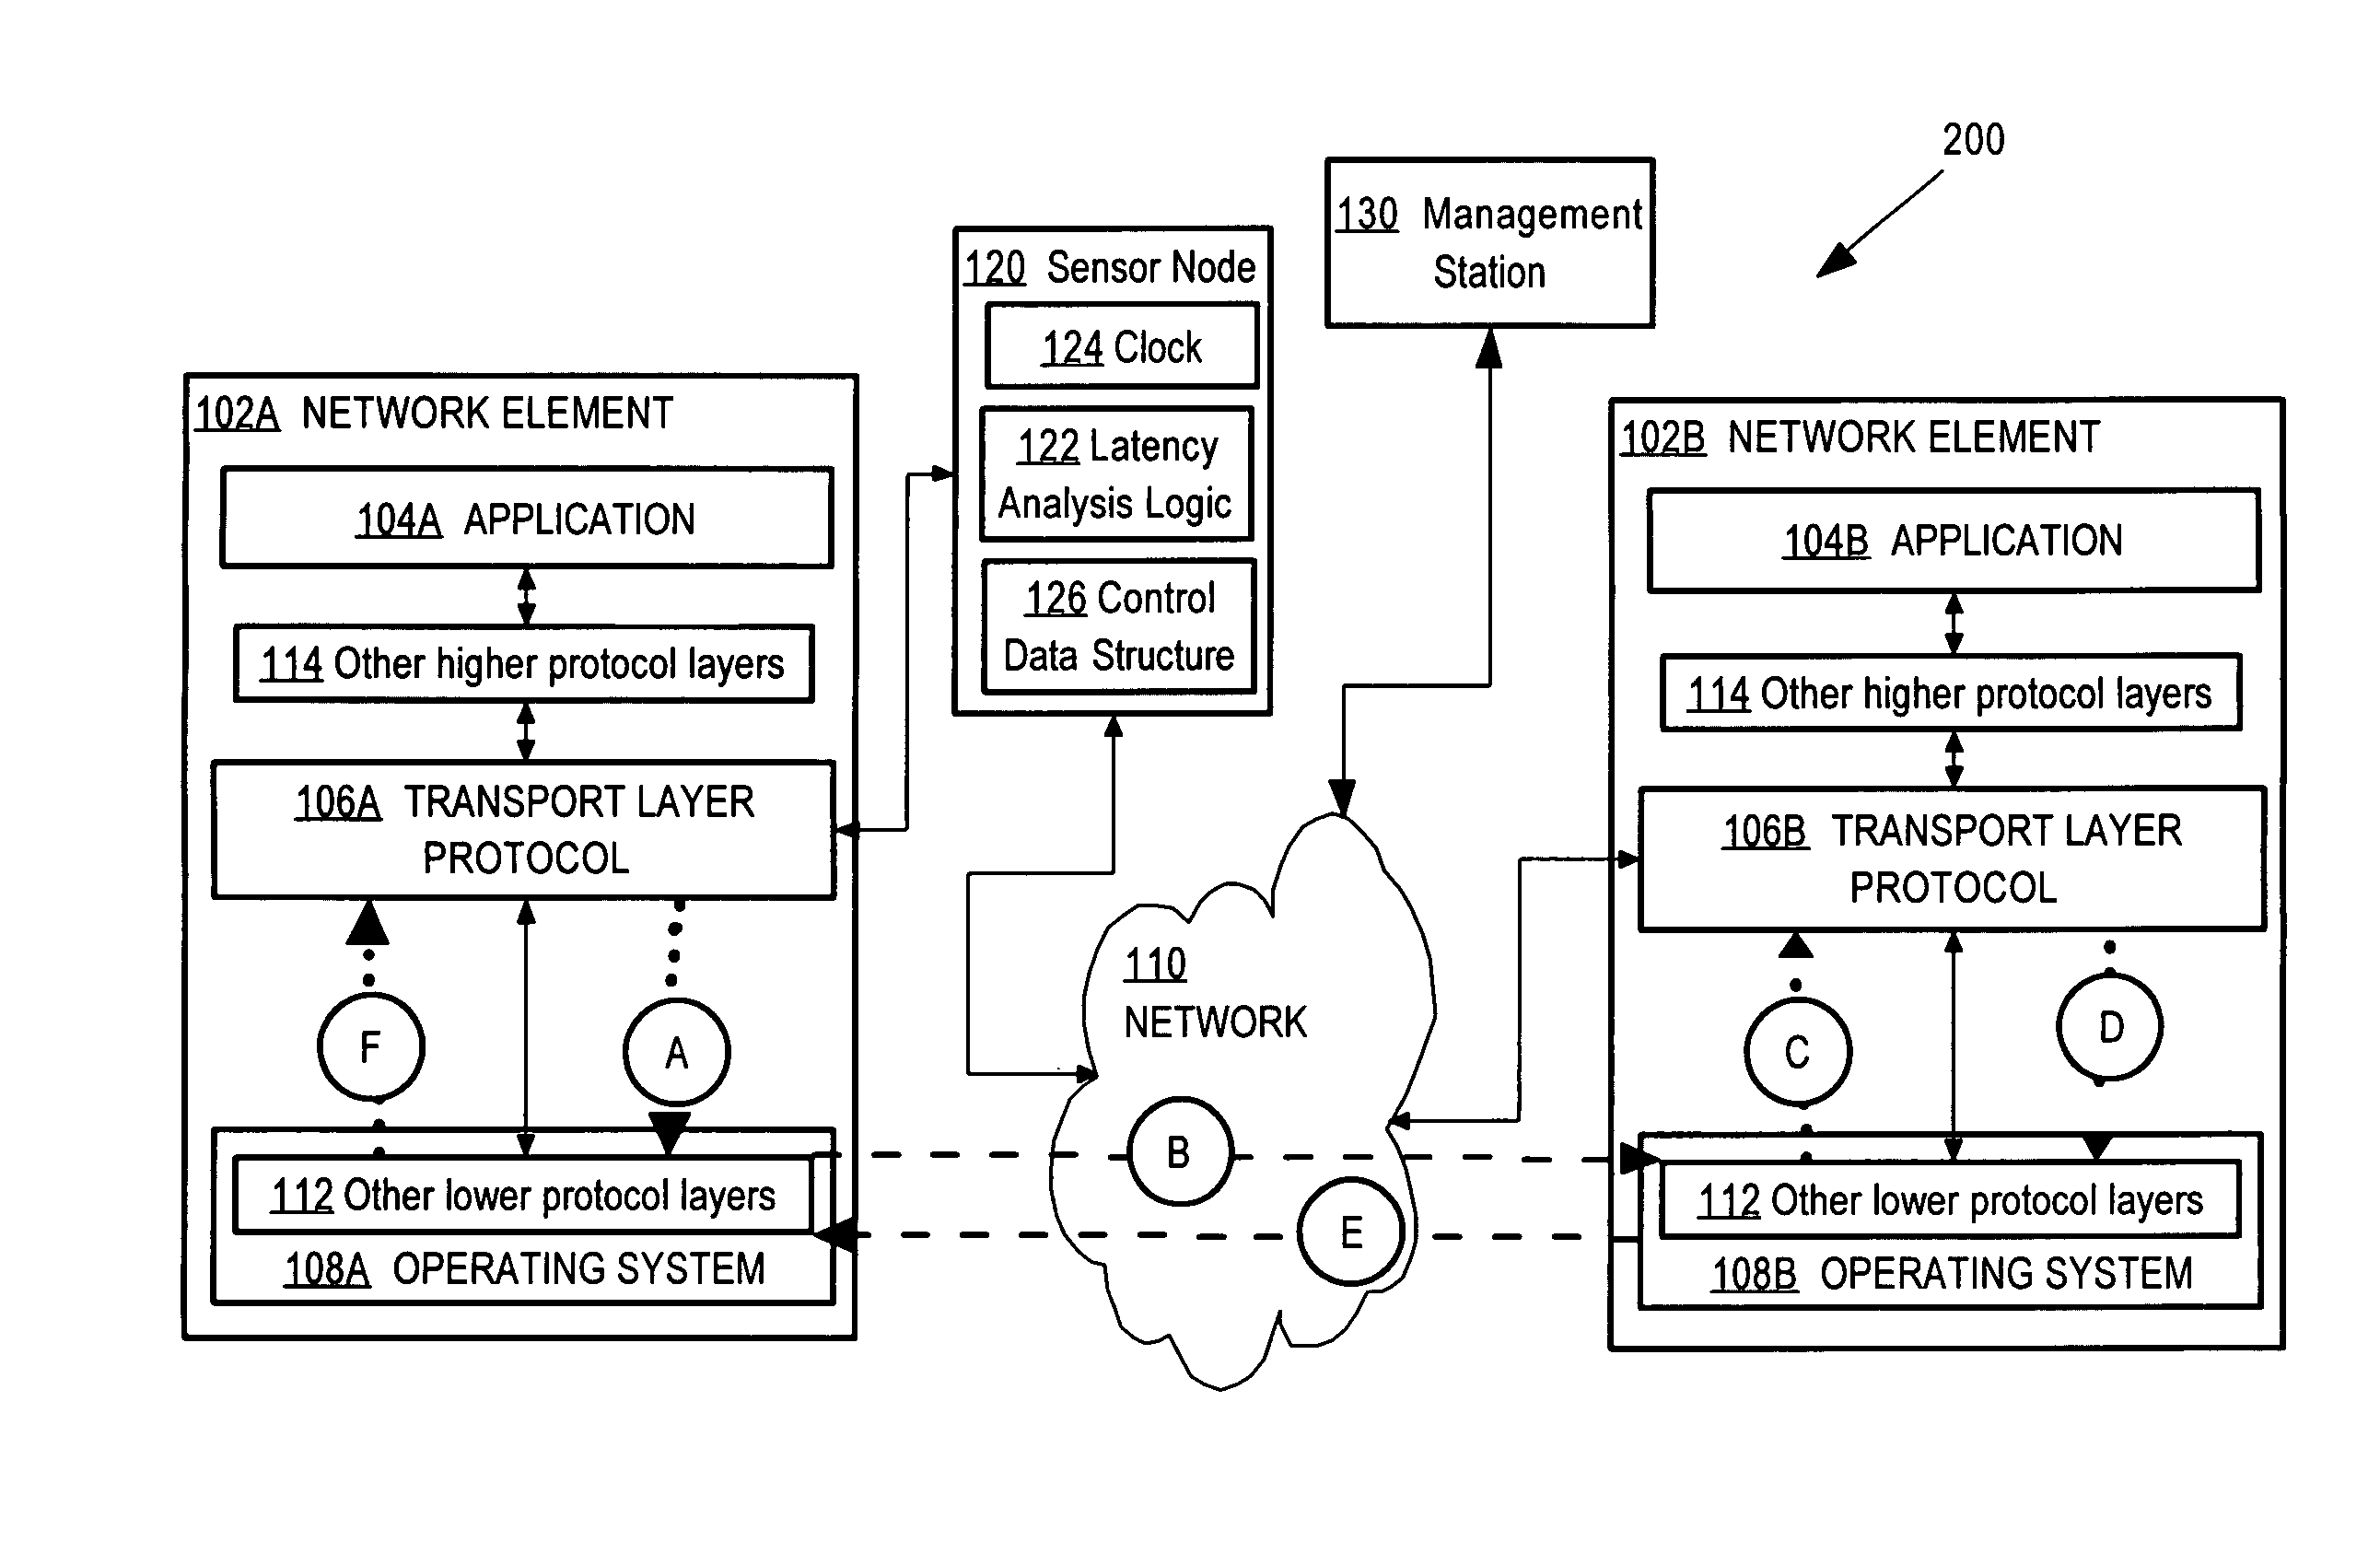 Network device that determines application-level network latency by monitoring option values in a transport layer message